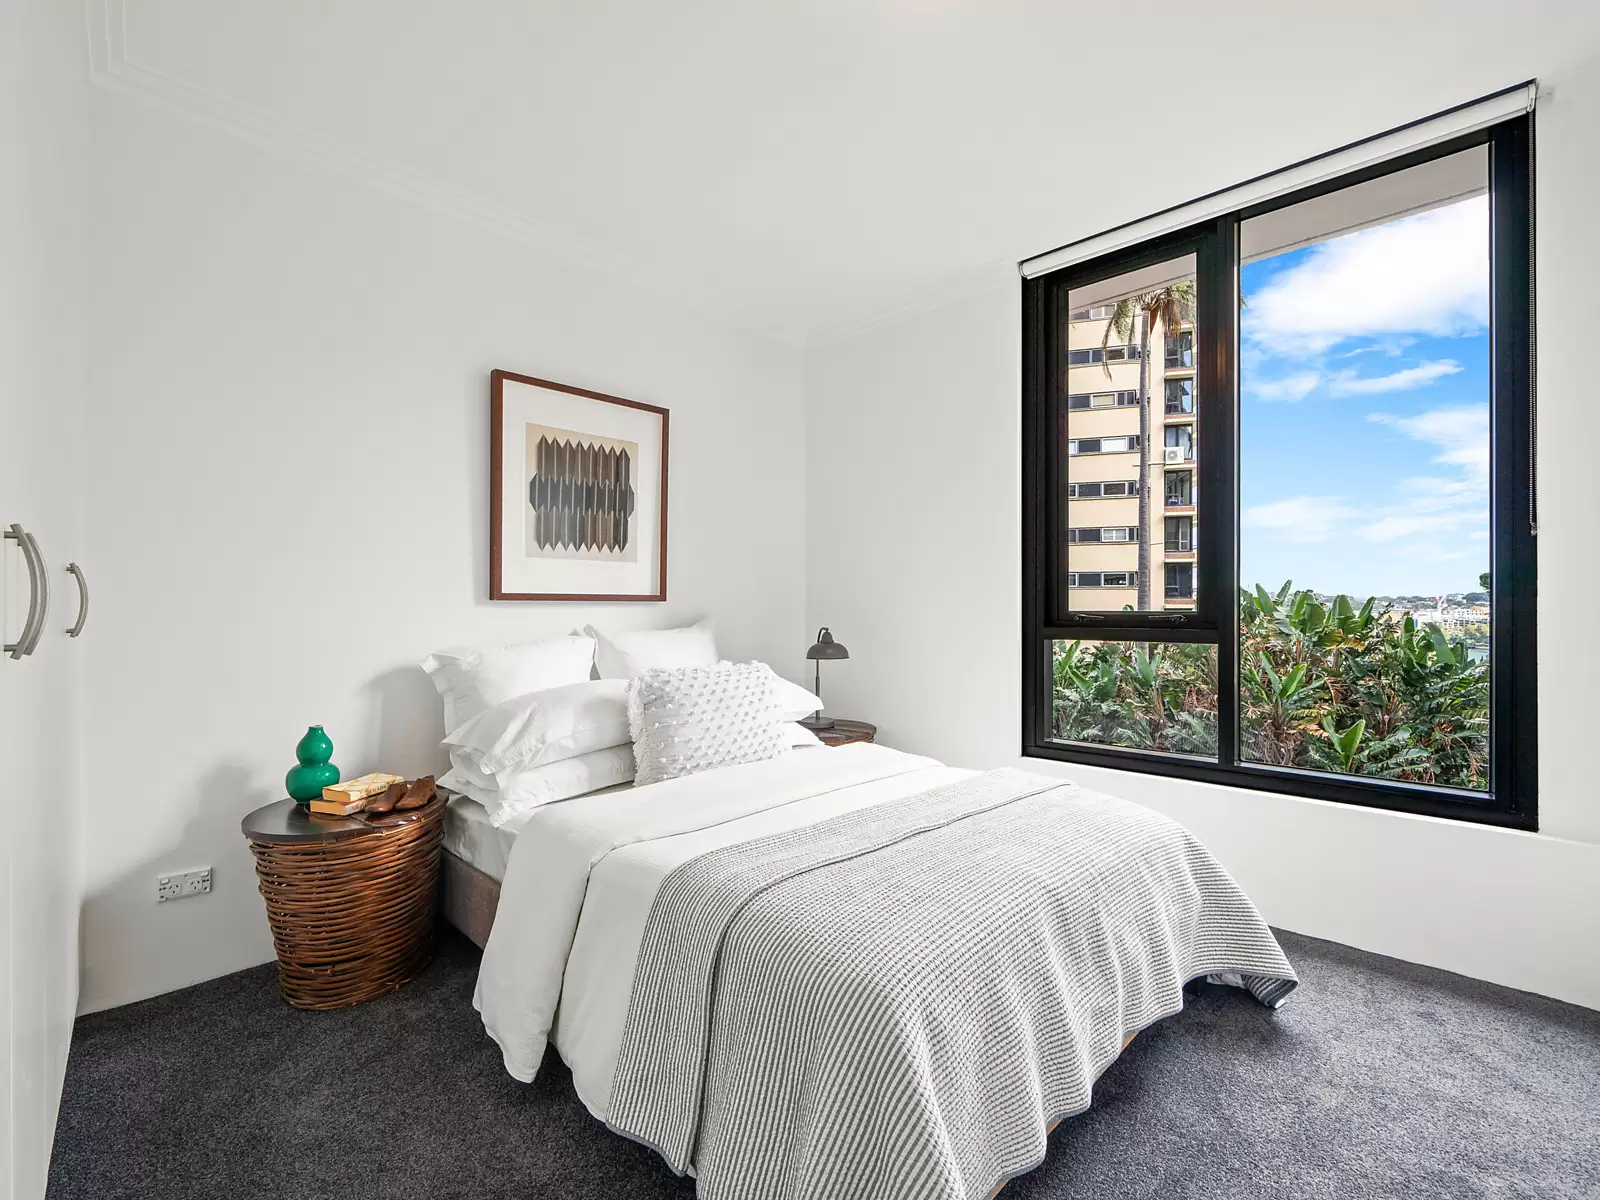 Photo #14: 3B/21 Thornton Street, Darling Point - Sold by Sydney Sotheby's International Realty